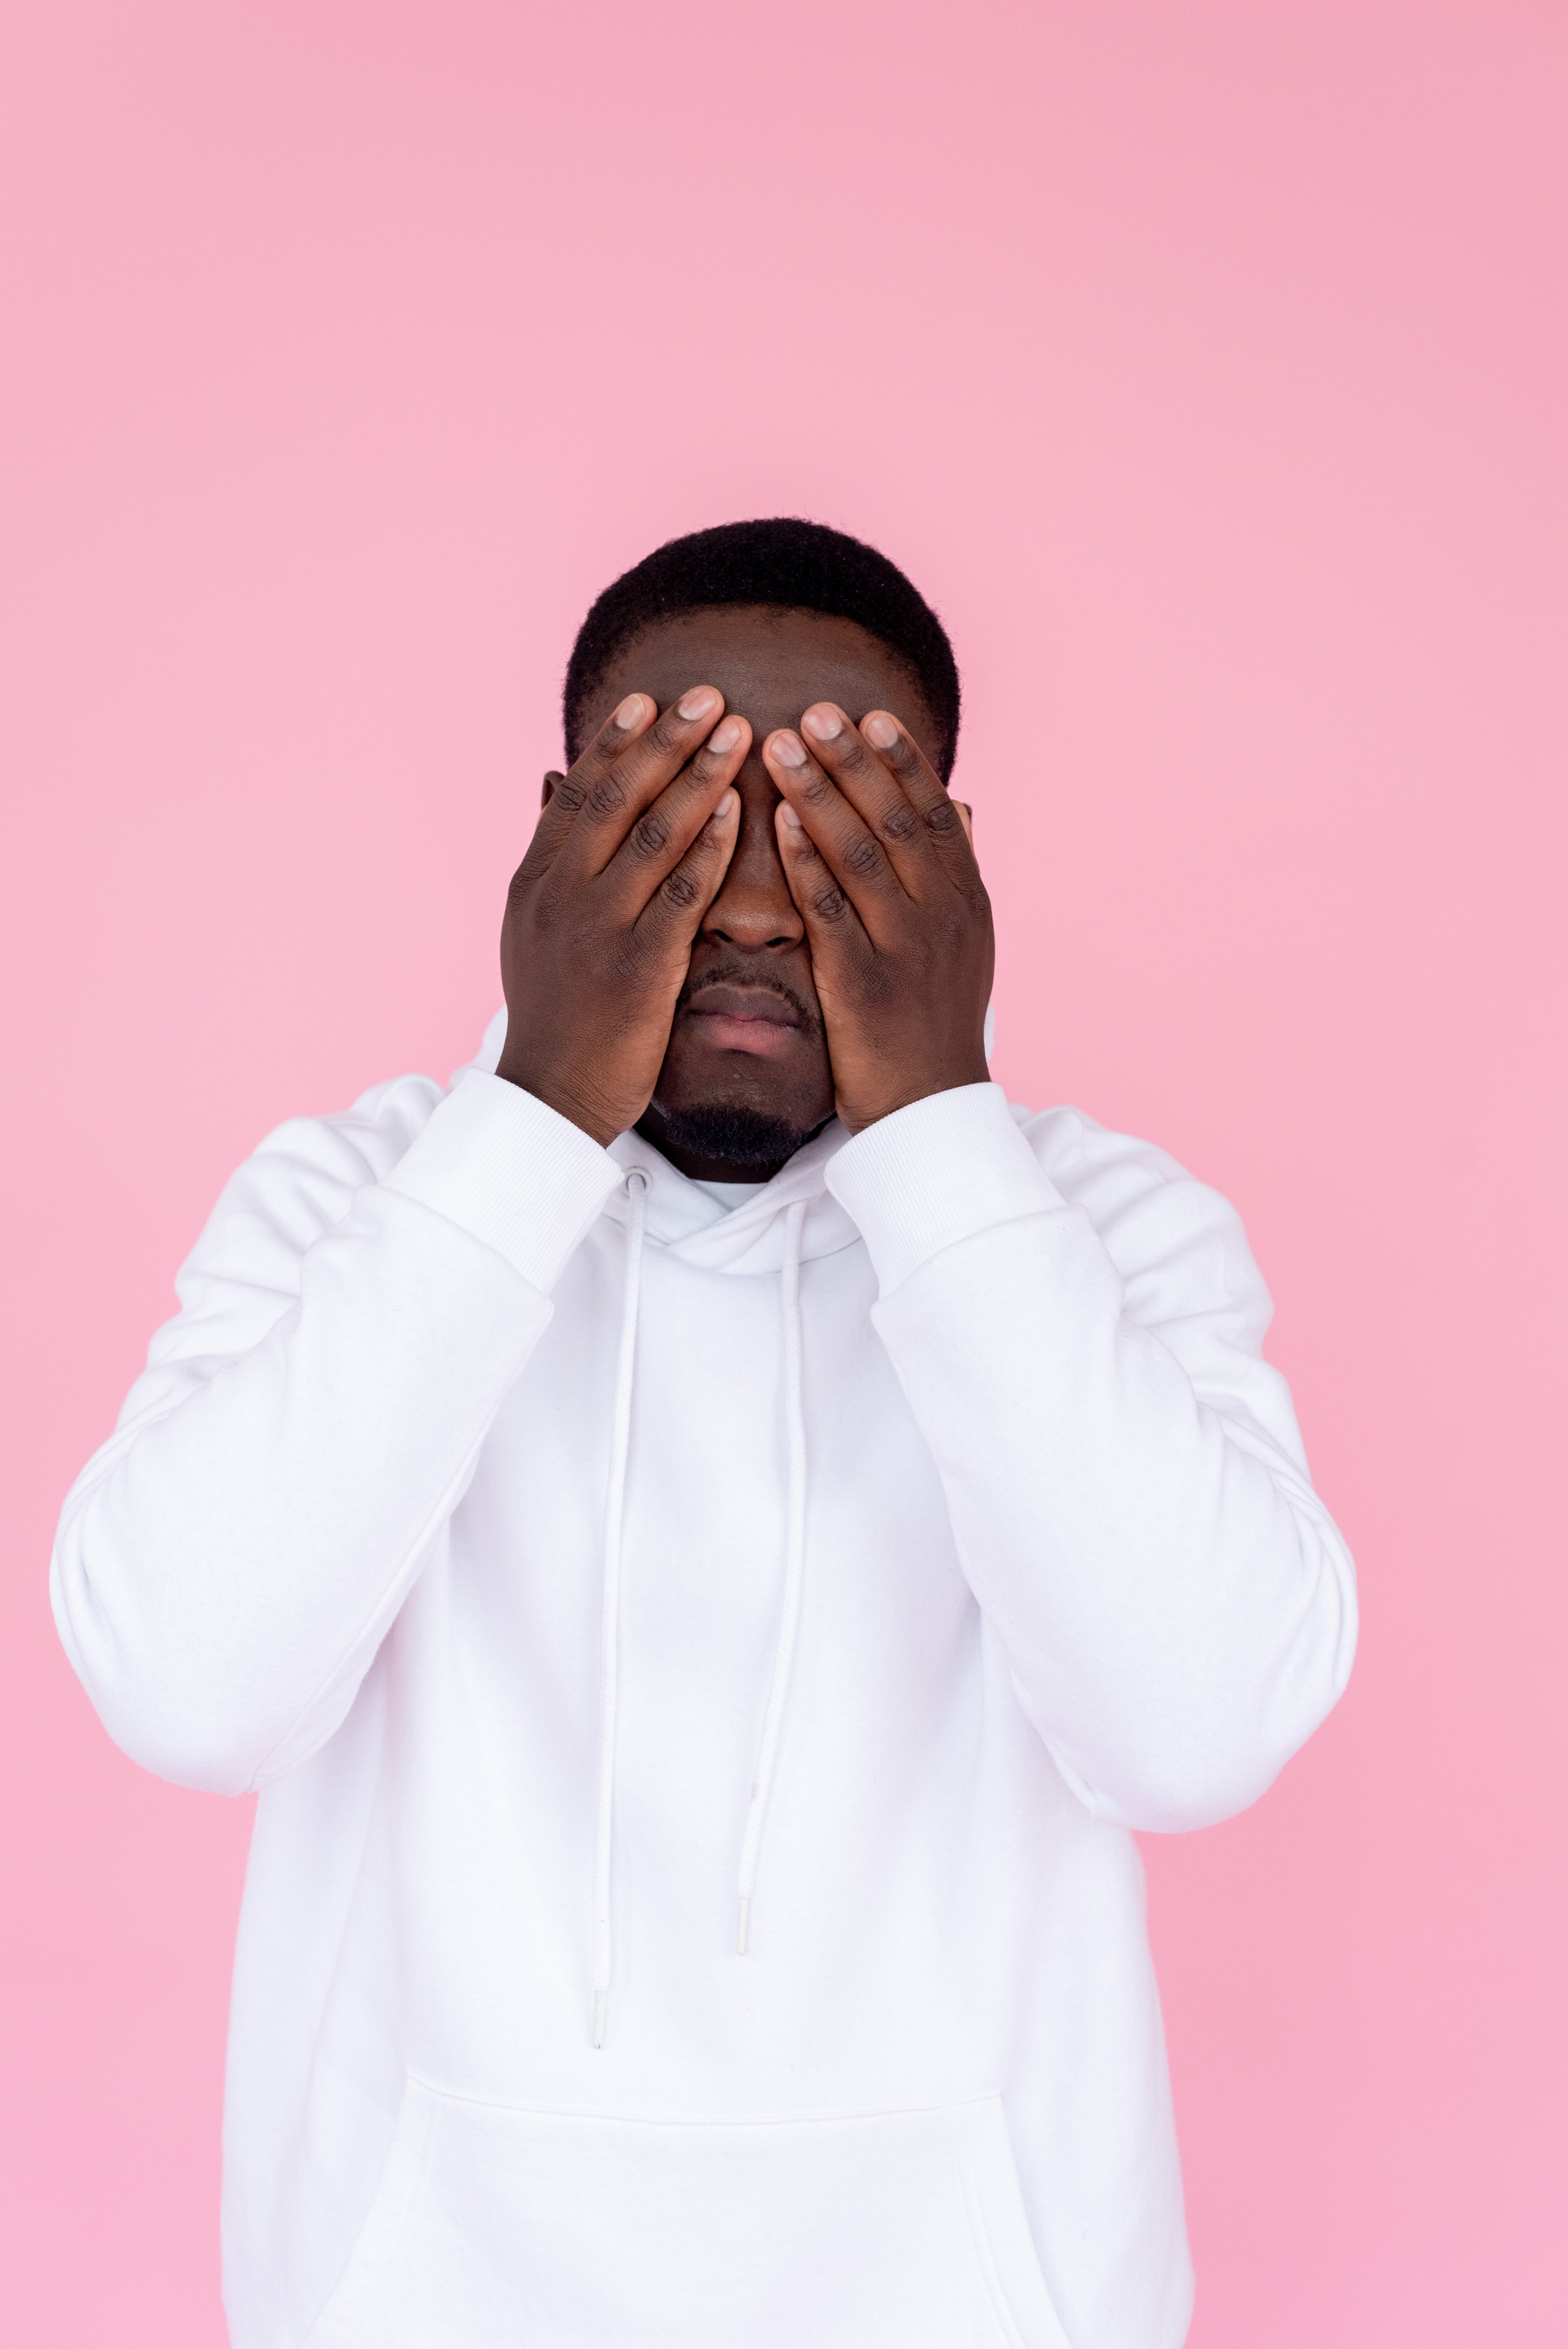 Sad black man covering his hands with face | Photo: Pexels